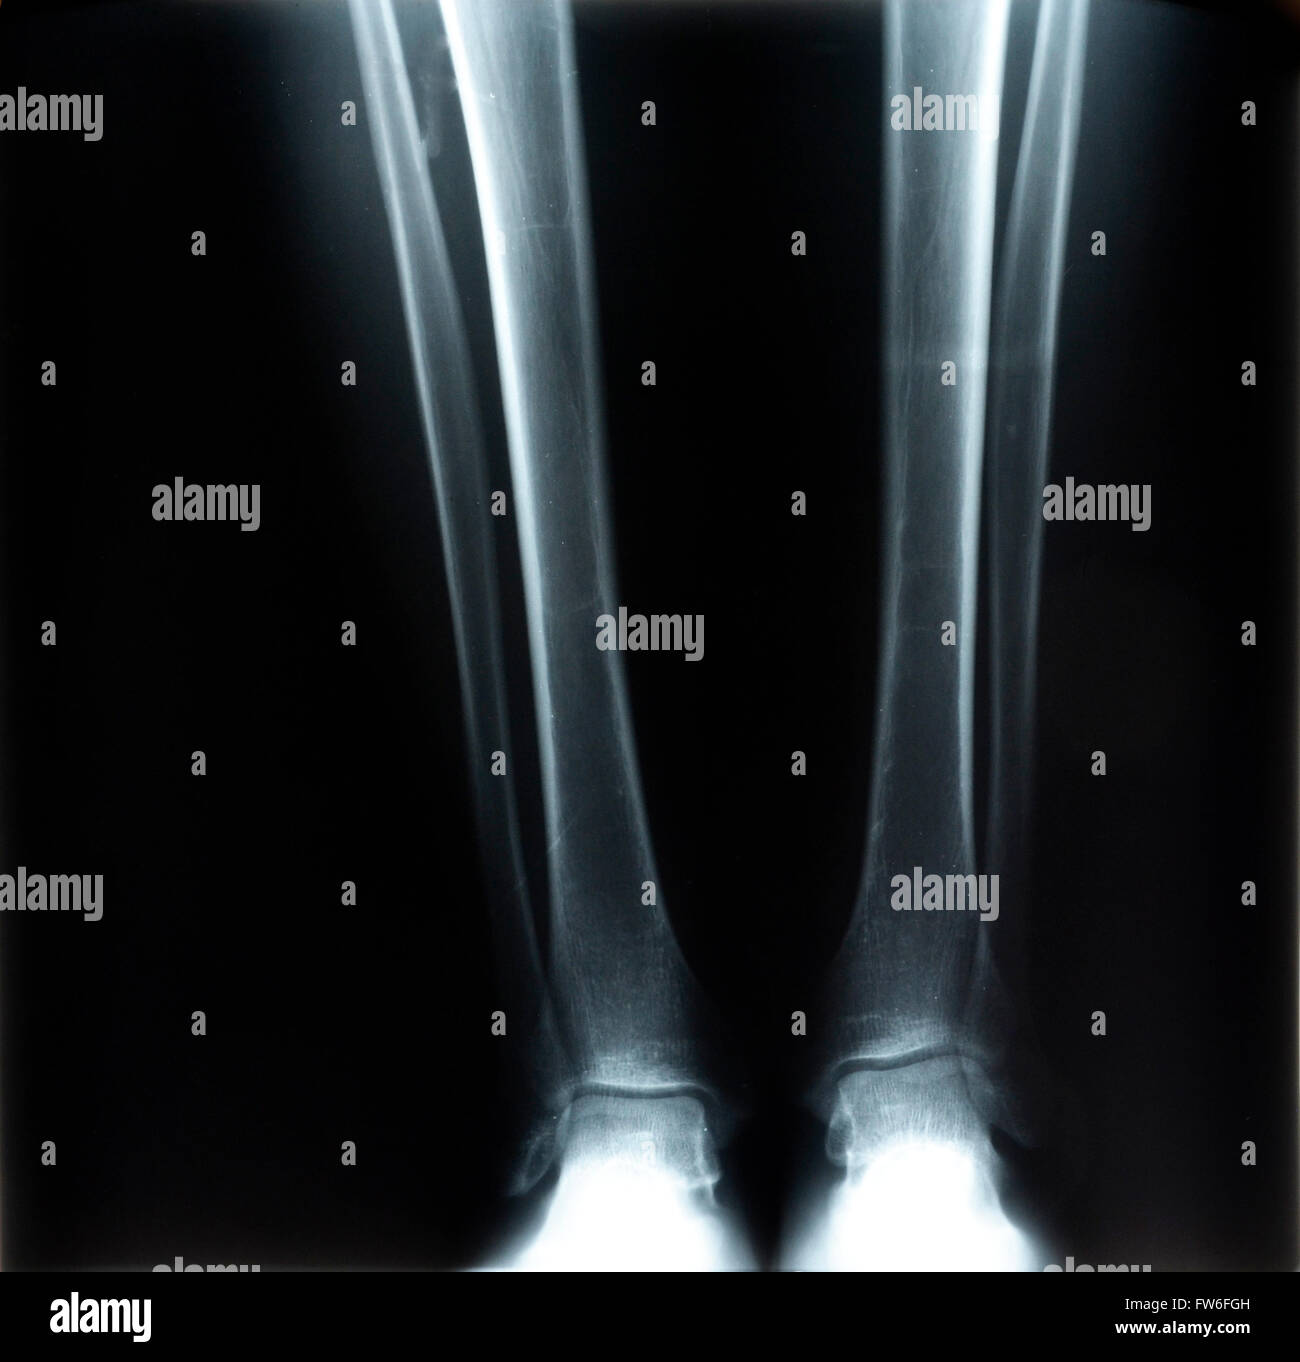 X-ray des deux jambes humaines Banque D'Images